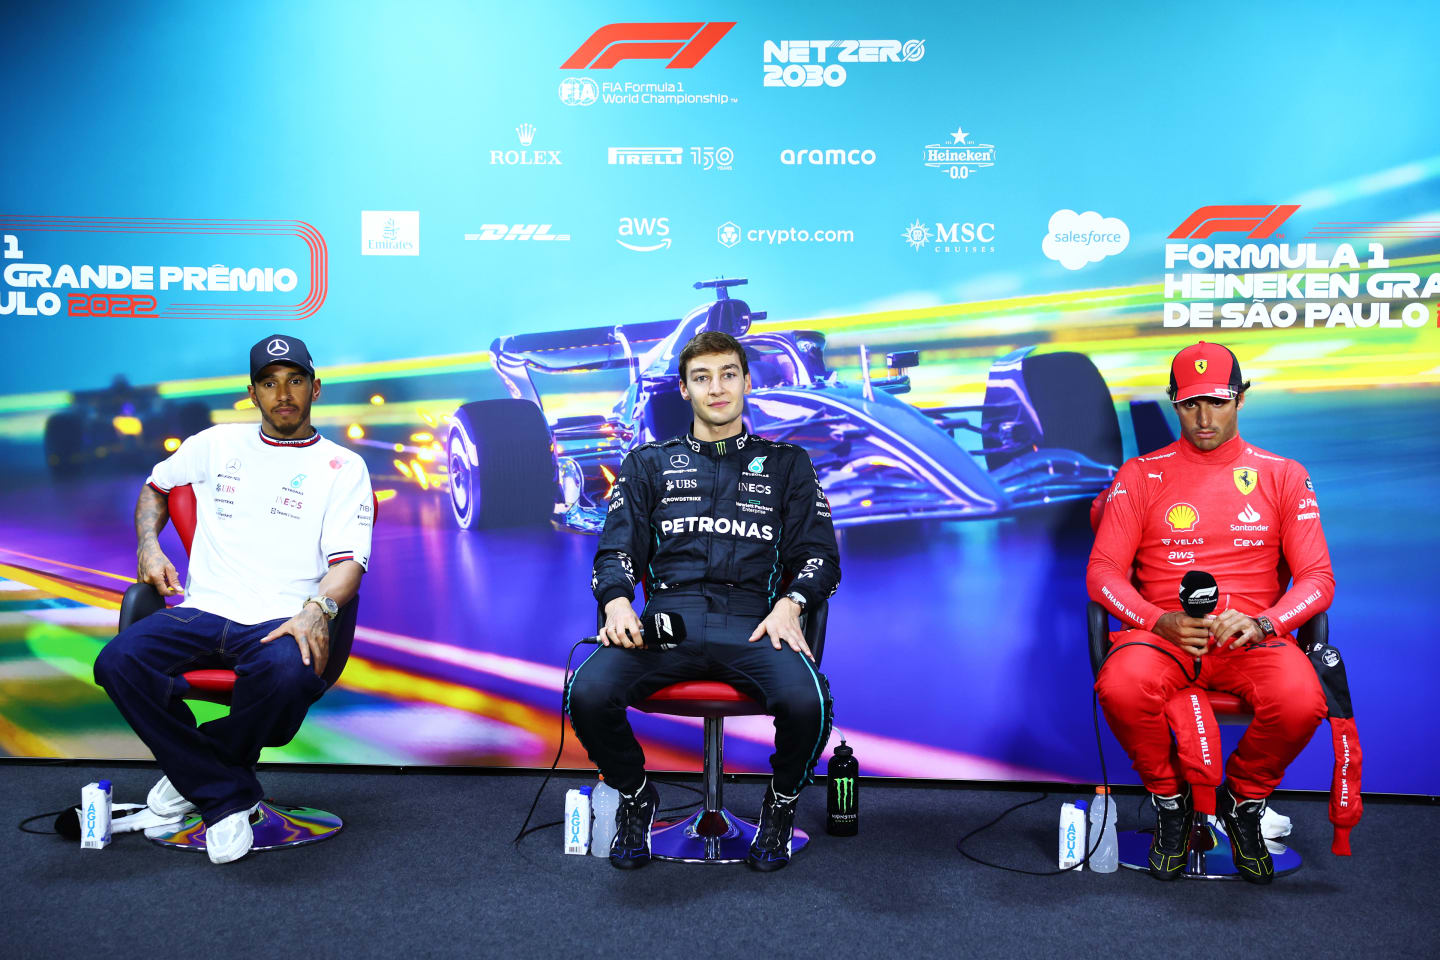 SAO PAULO, BRAZIL - NOVEMBER 13: Race winner George Russell of Great Britain and Mercedes, Second placed Lewis Hamilton of Great Britain and Mercedes and Third placed Carlos Sainz of Spain and Ferrari attend the press conference after the F1 Grand Prix of Brazil at Autodromo Jose Carlos Pace on November 13, 2022 in Sao Paulo, Brazil. (Photo by Dan Istitene/Getty Images)